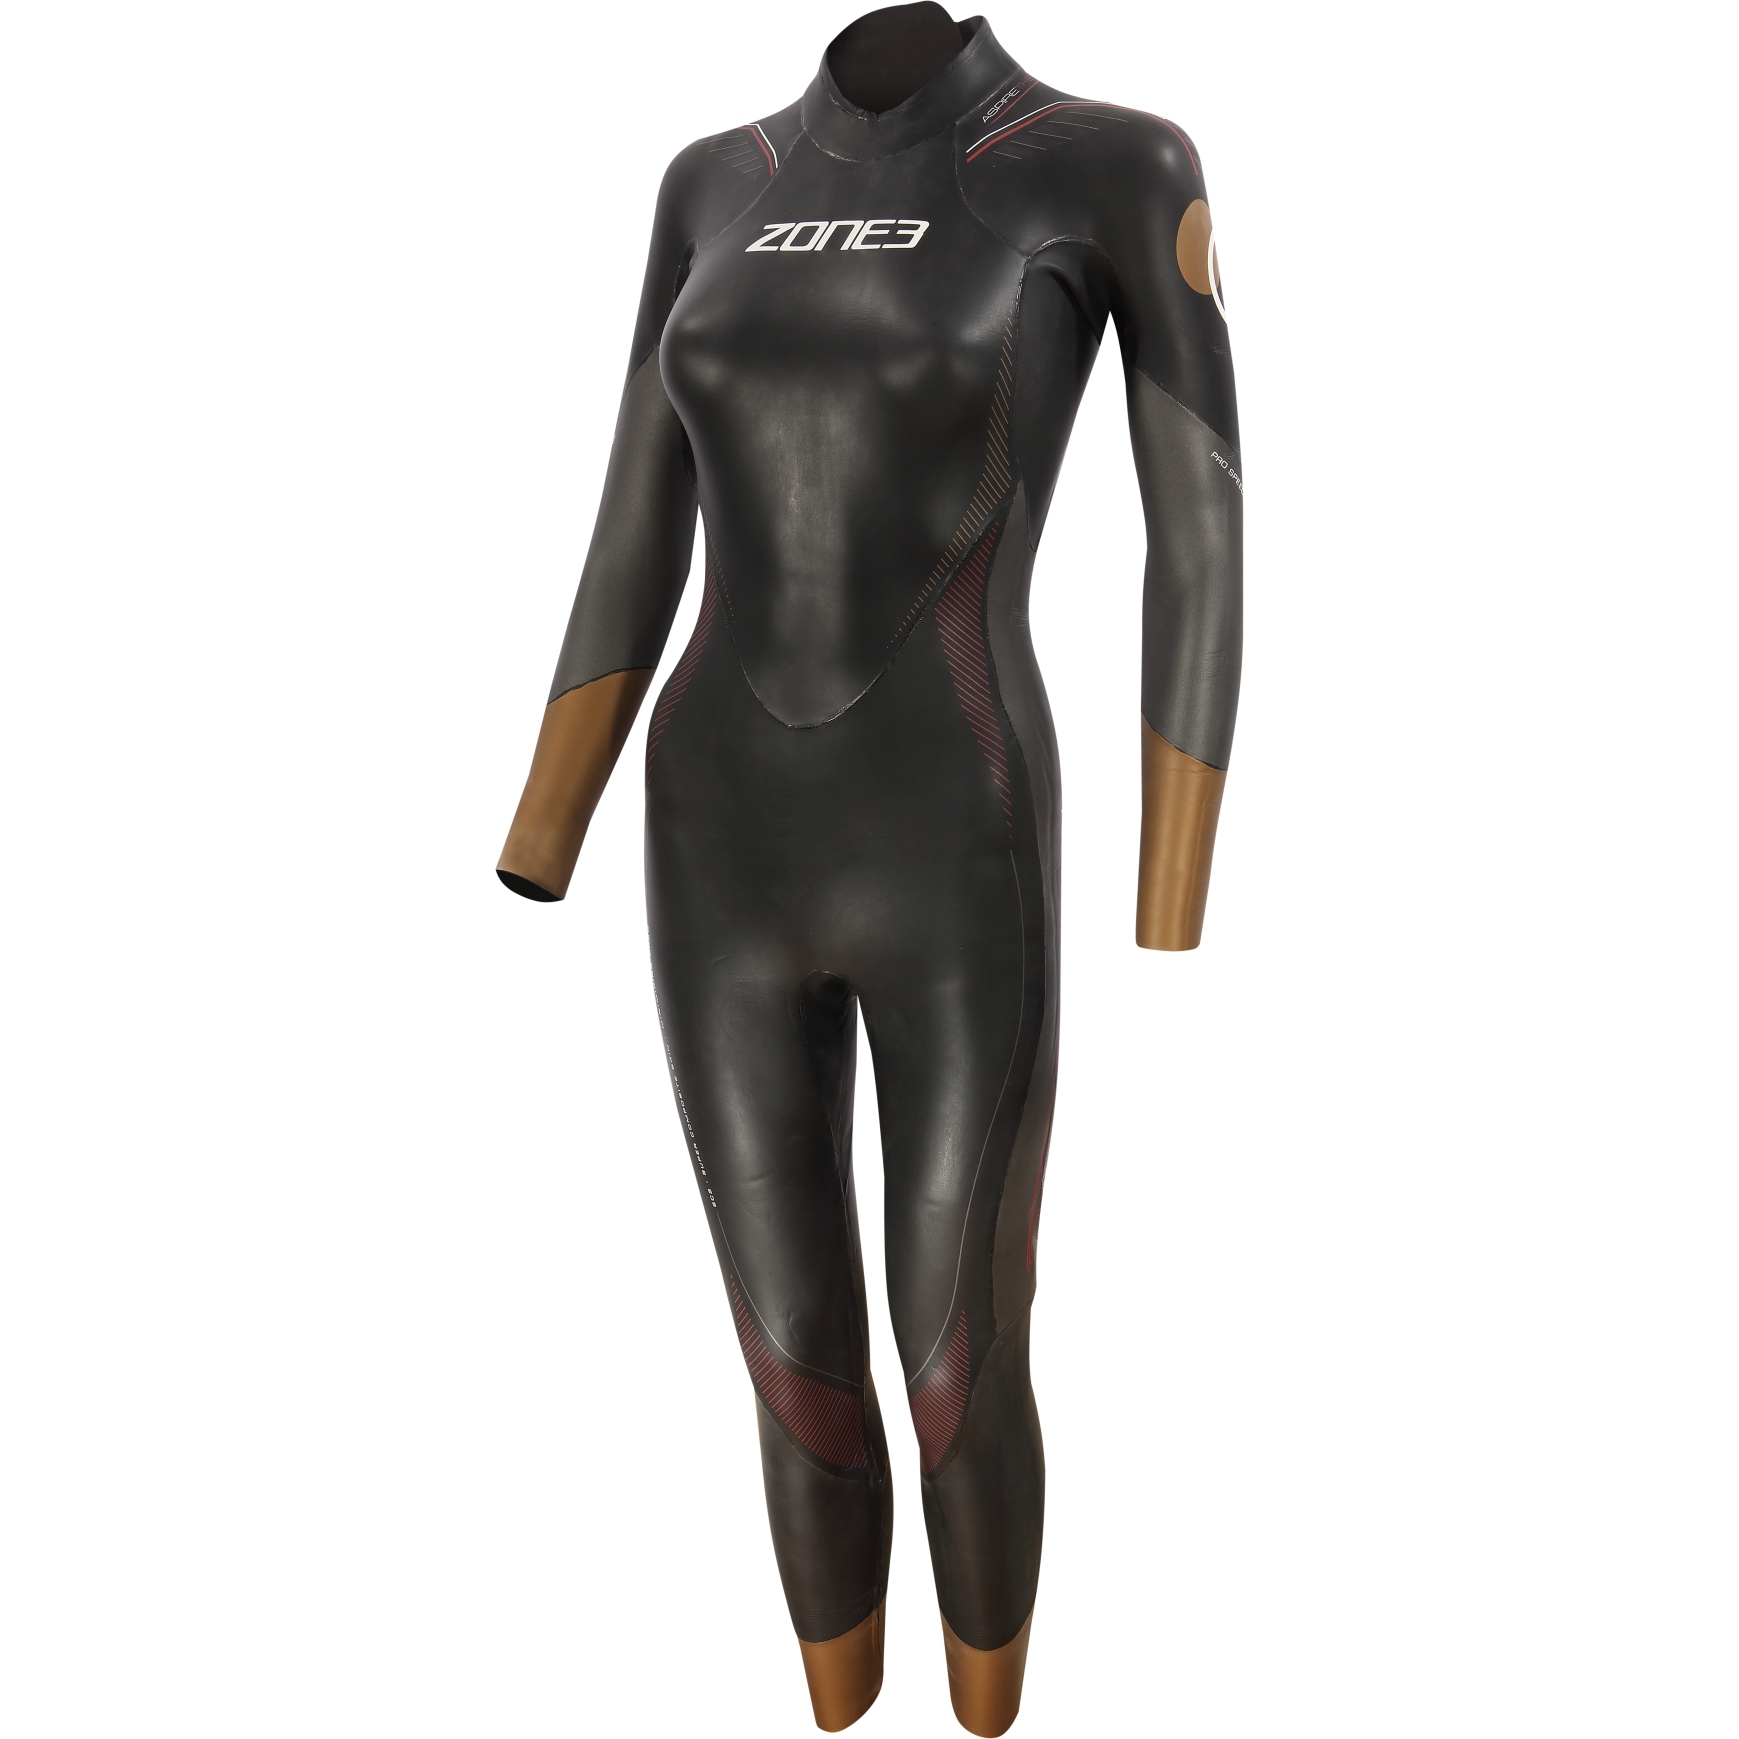 Image of Zone3 Women's Aspire Thermal Wetsuit - black/grey/gold/red